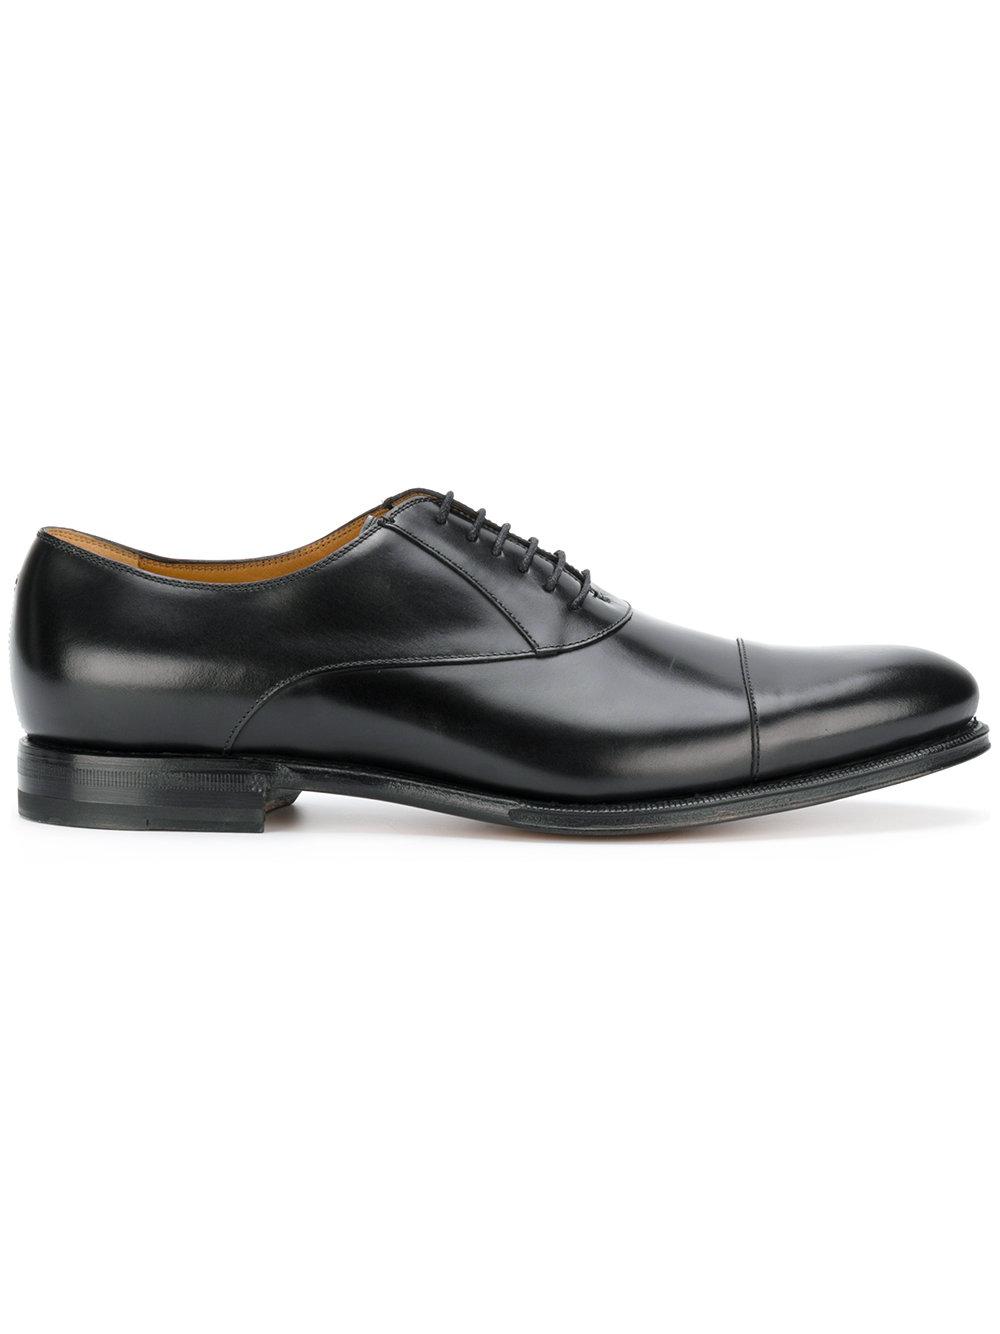 Gucci Leather New Signoria Oxford Shoes in Black for Men - Lyst